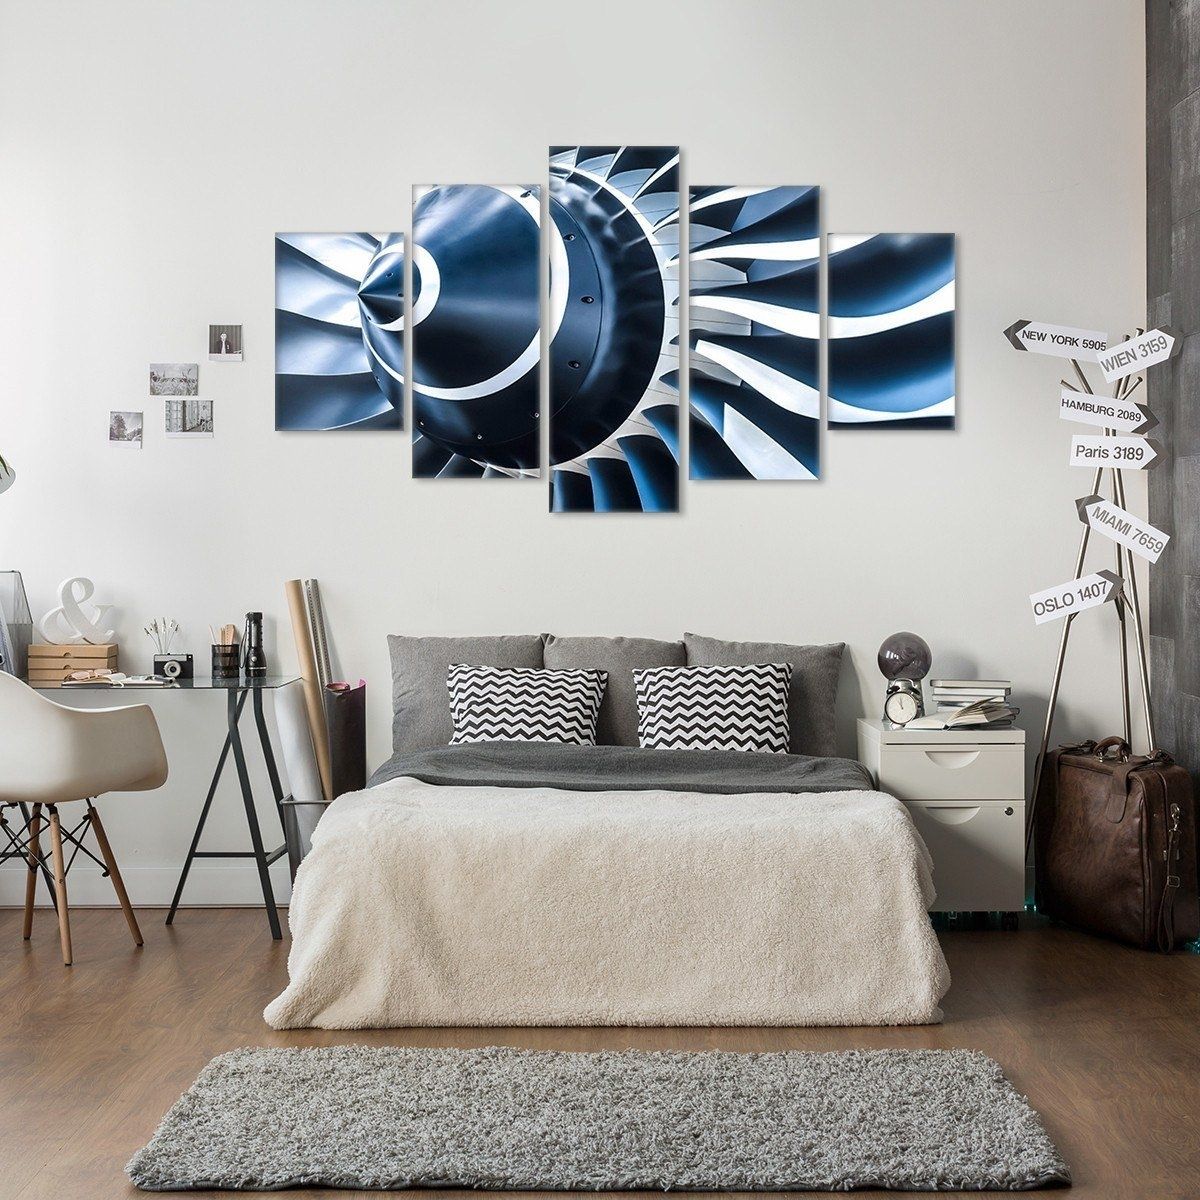 Aviation Wall Art Bedroom : Andrews Living Arts – Cool Themed Throughout Latest Aviation Wall Art (View 1 of 20)